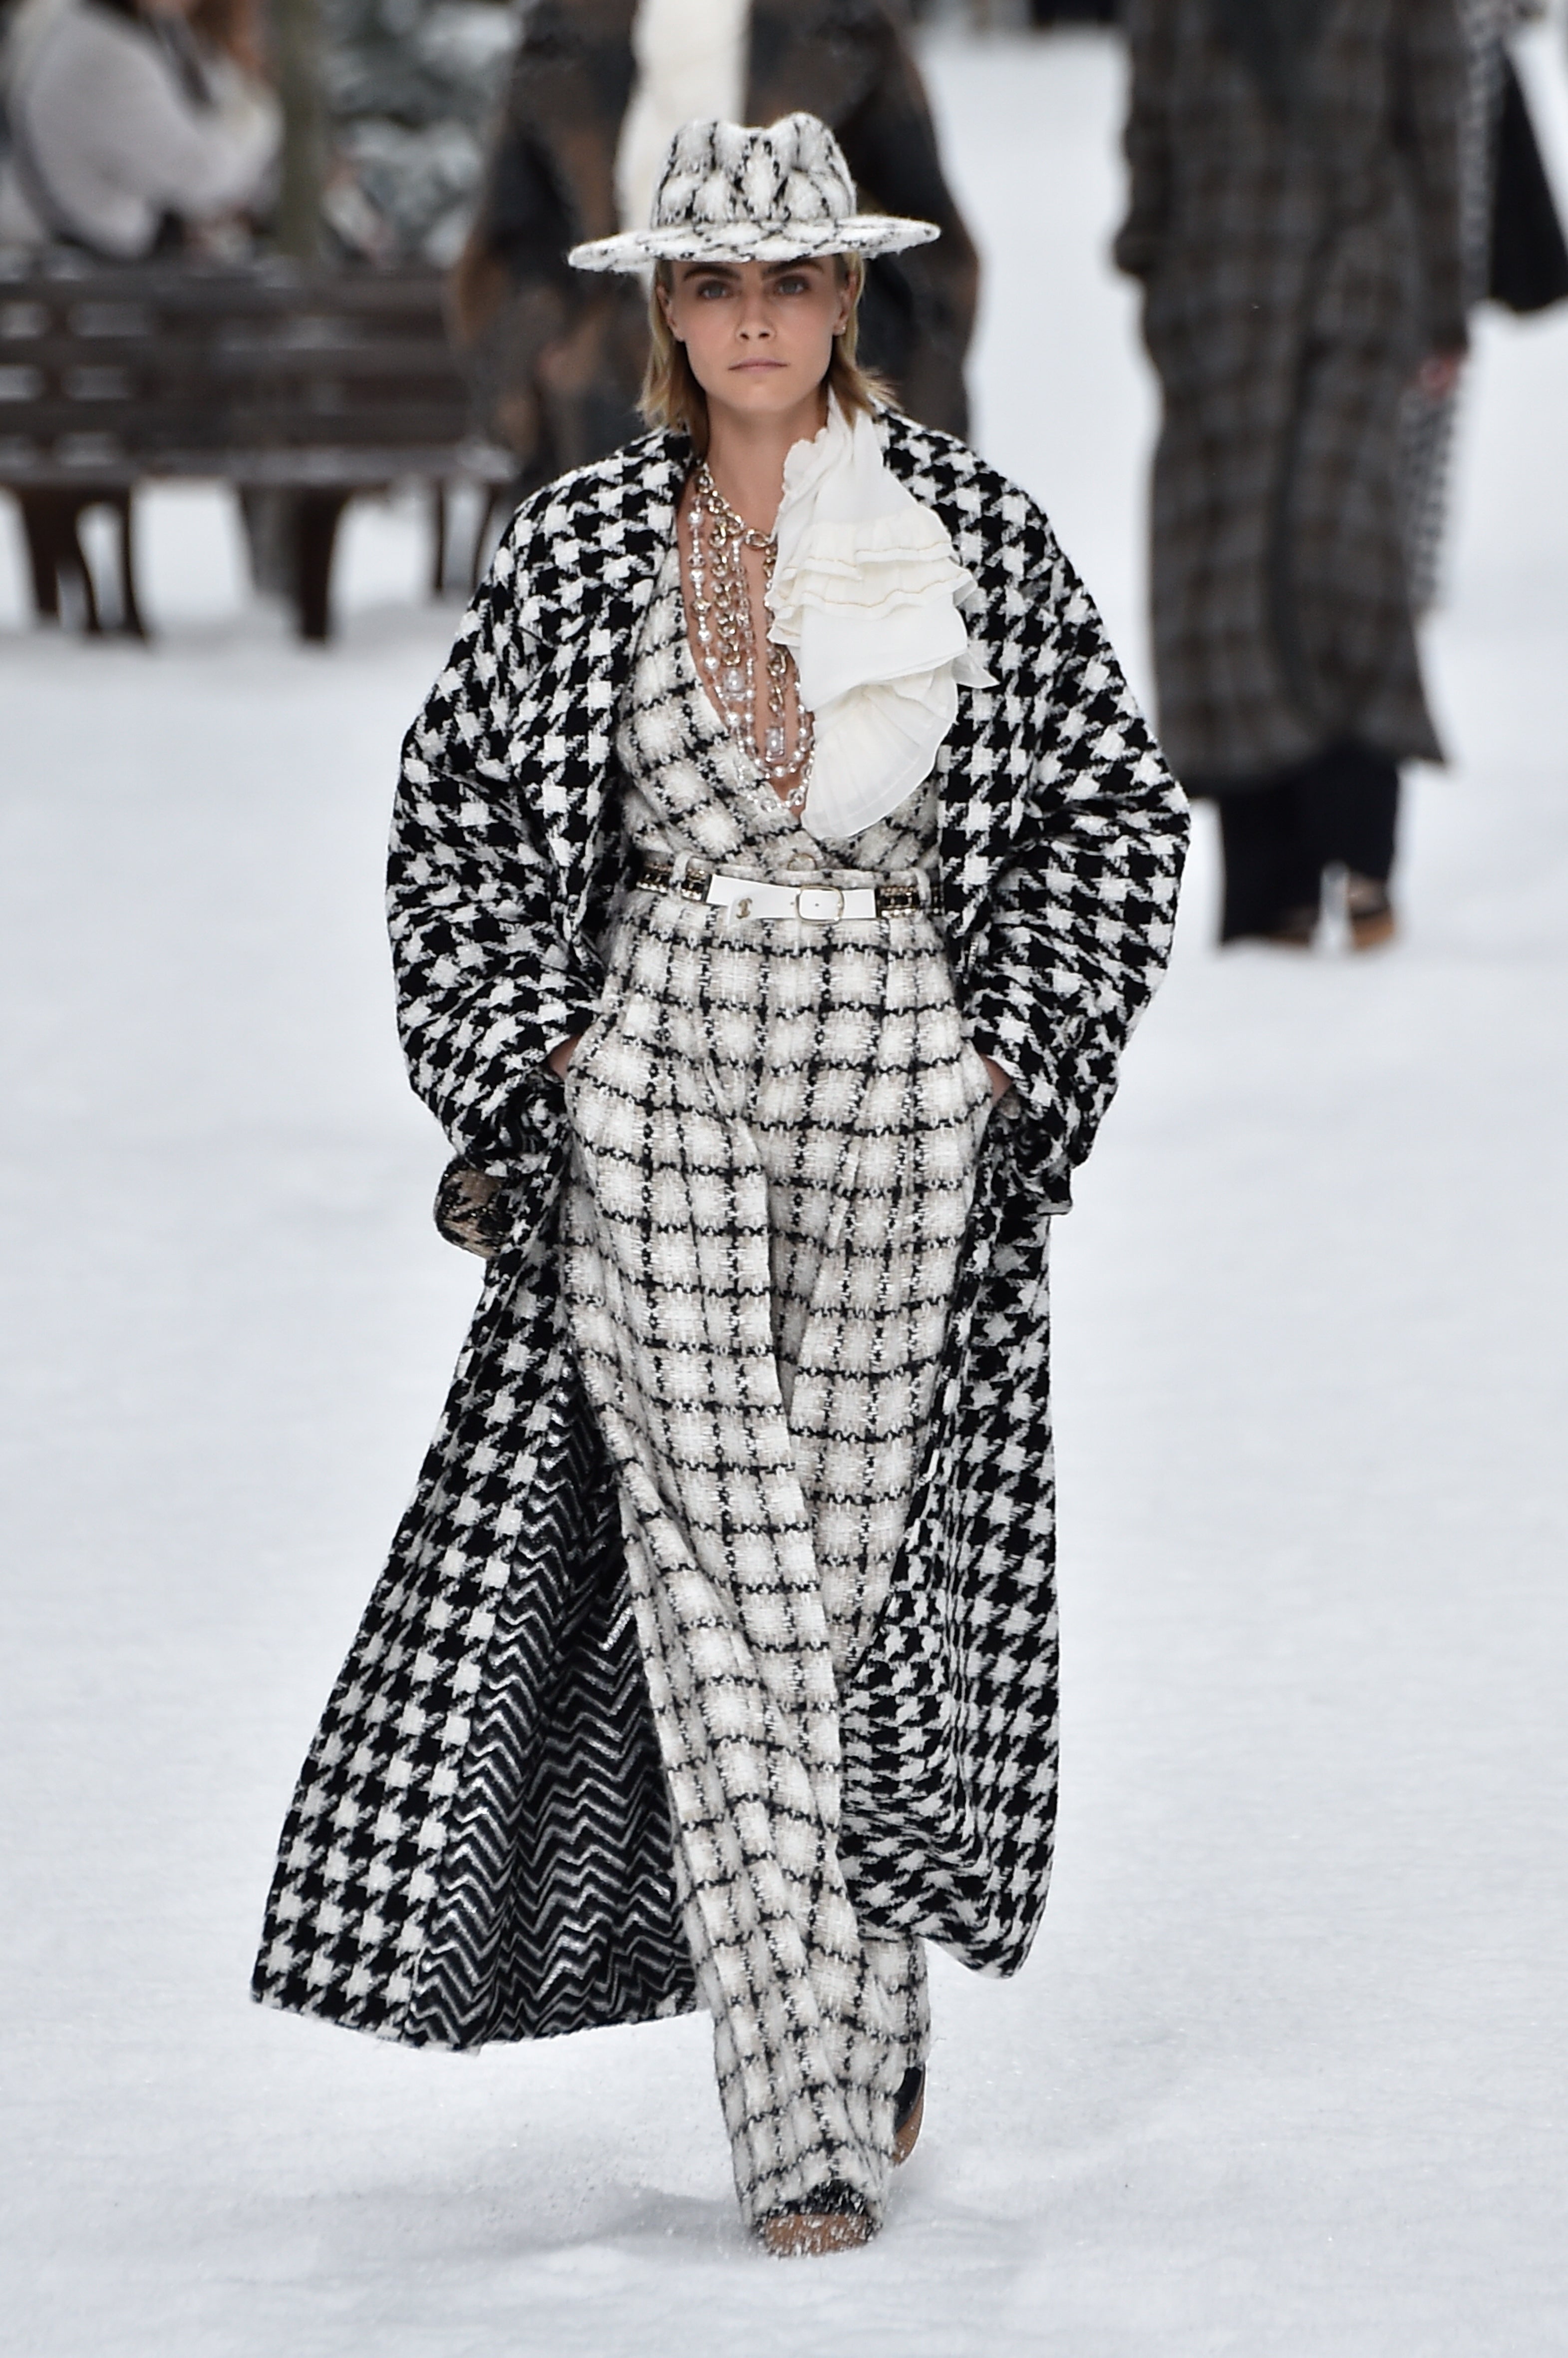 Paris Fashion Week: At Chanel, Karl Lagerfeld Gives Women a Break – The  Hollywood Reporter